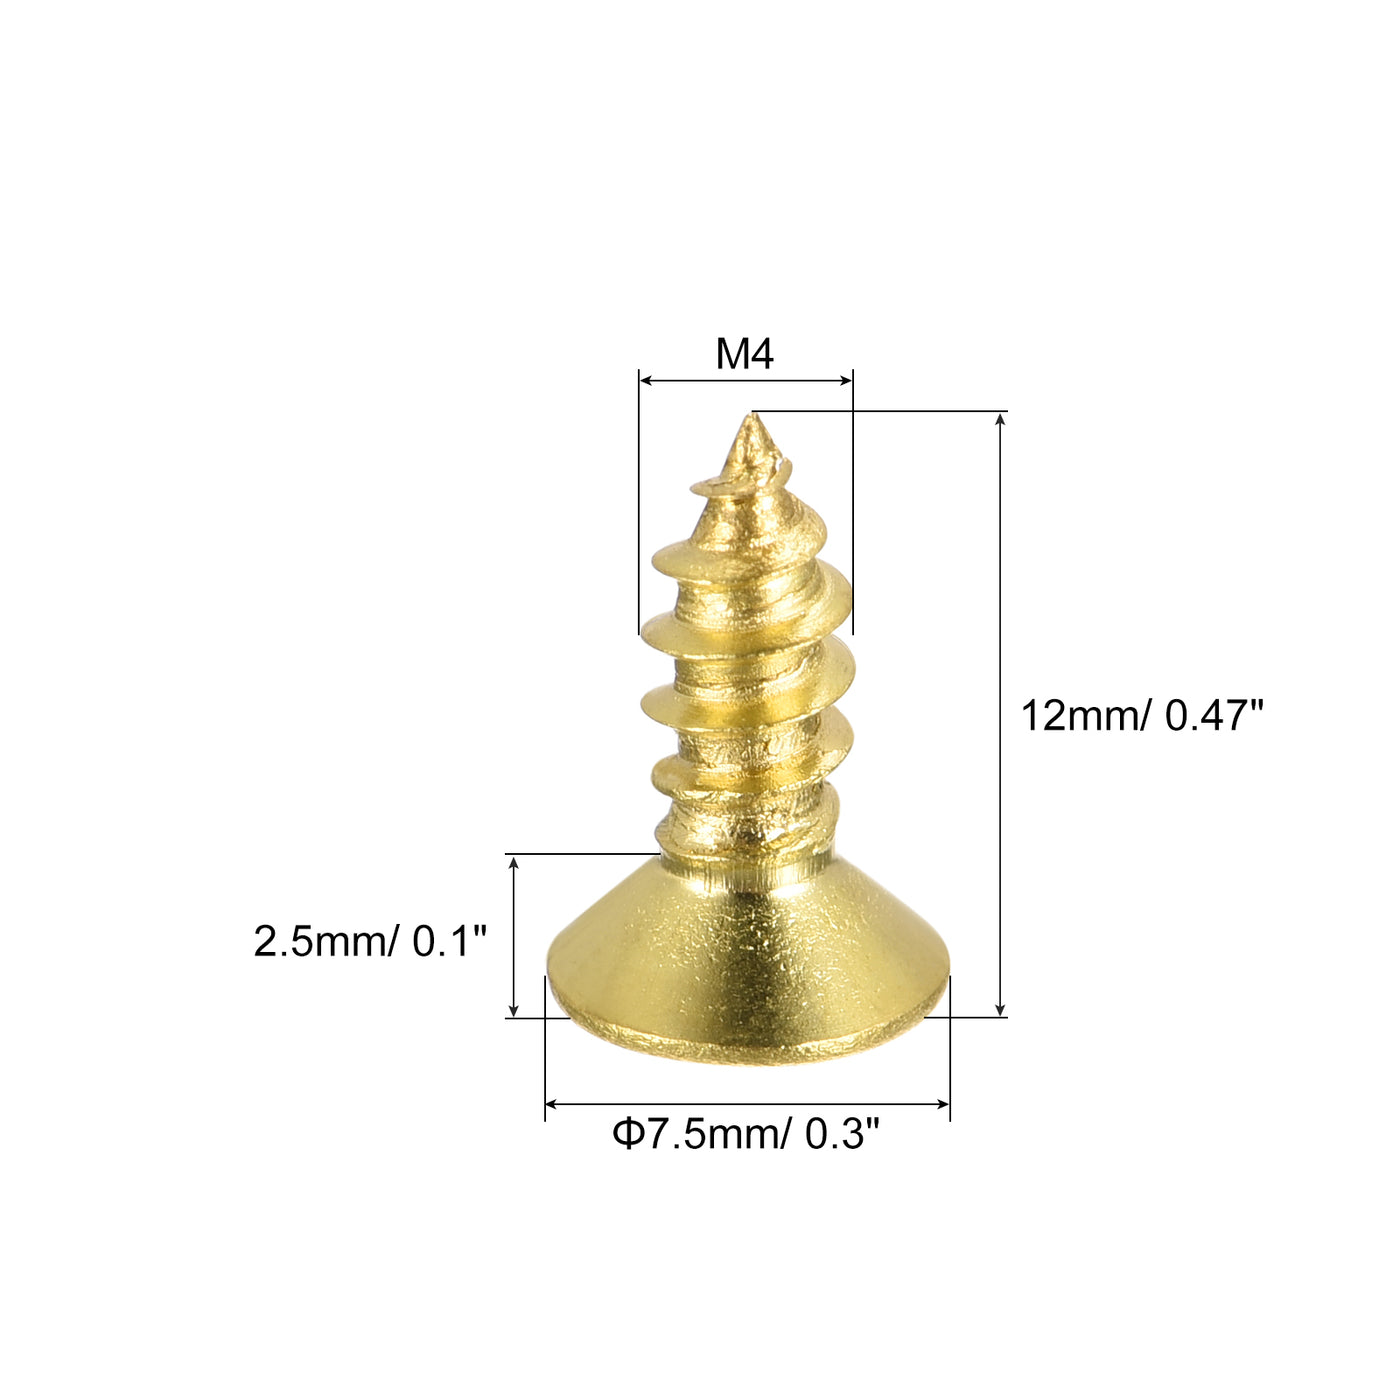 uxcell Uxcell Brass Wood Screws, M4x12mm Phillips Flat Head Self Tapping Connector for Door, Cabinet, Wooden Furniture 50Pcs